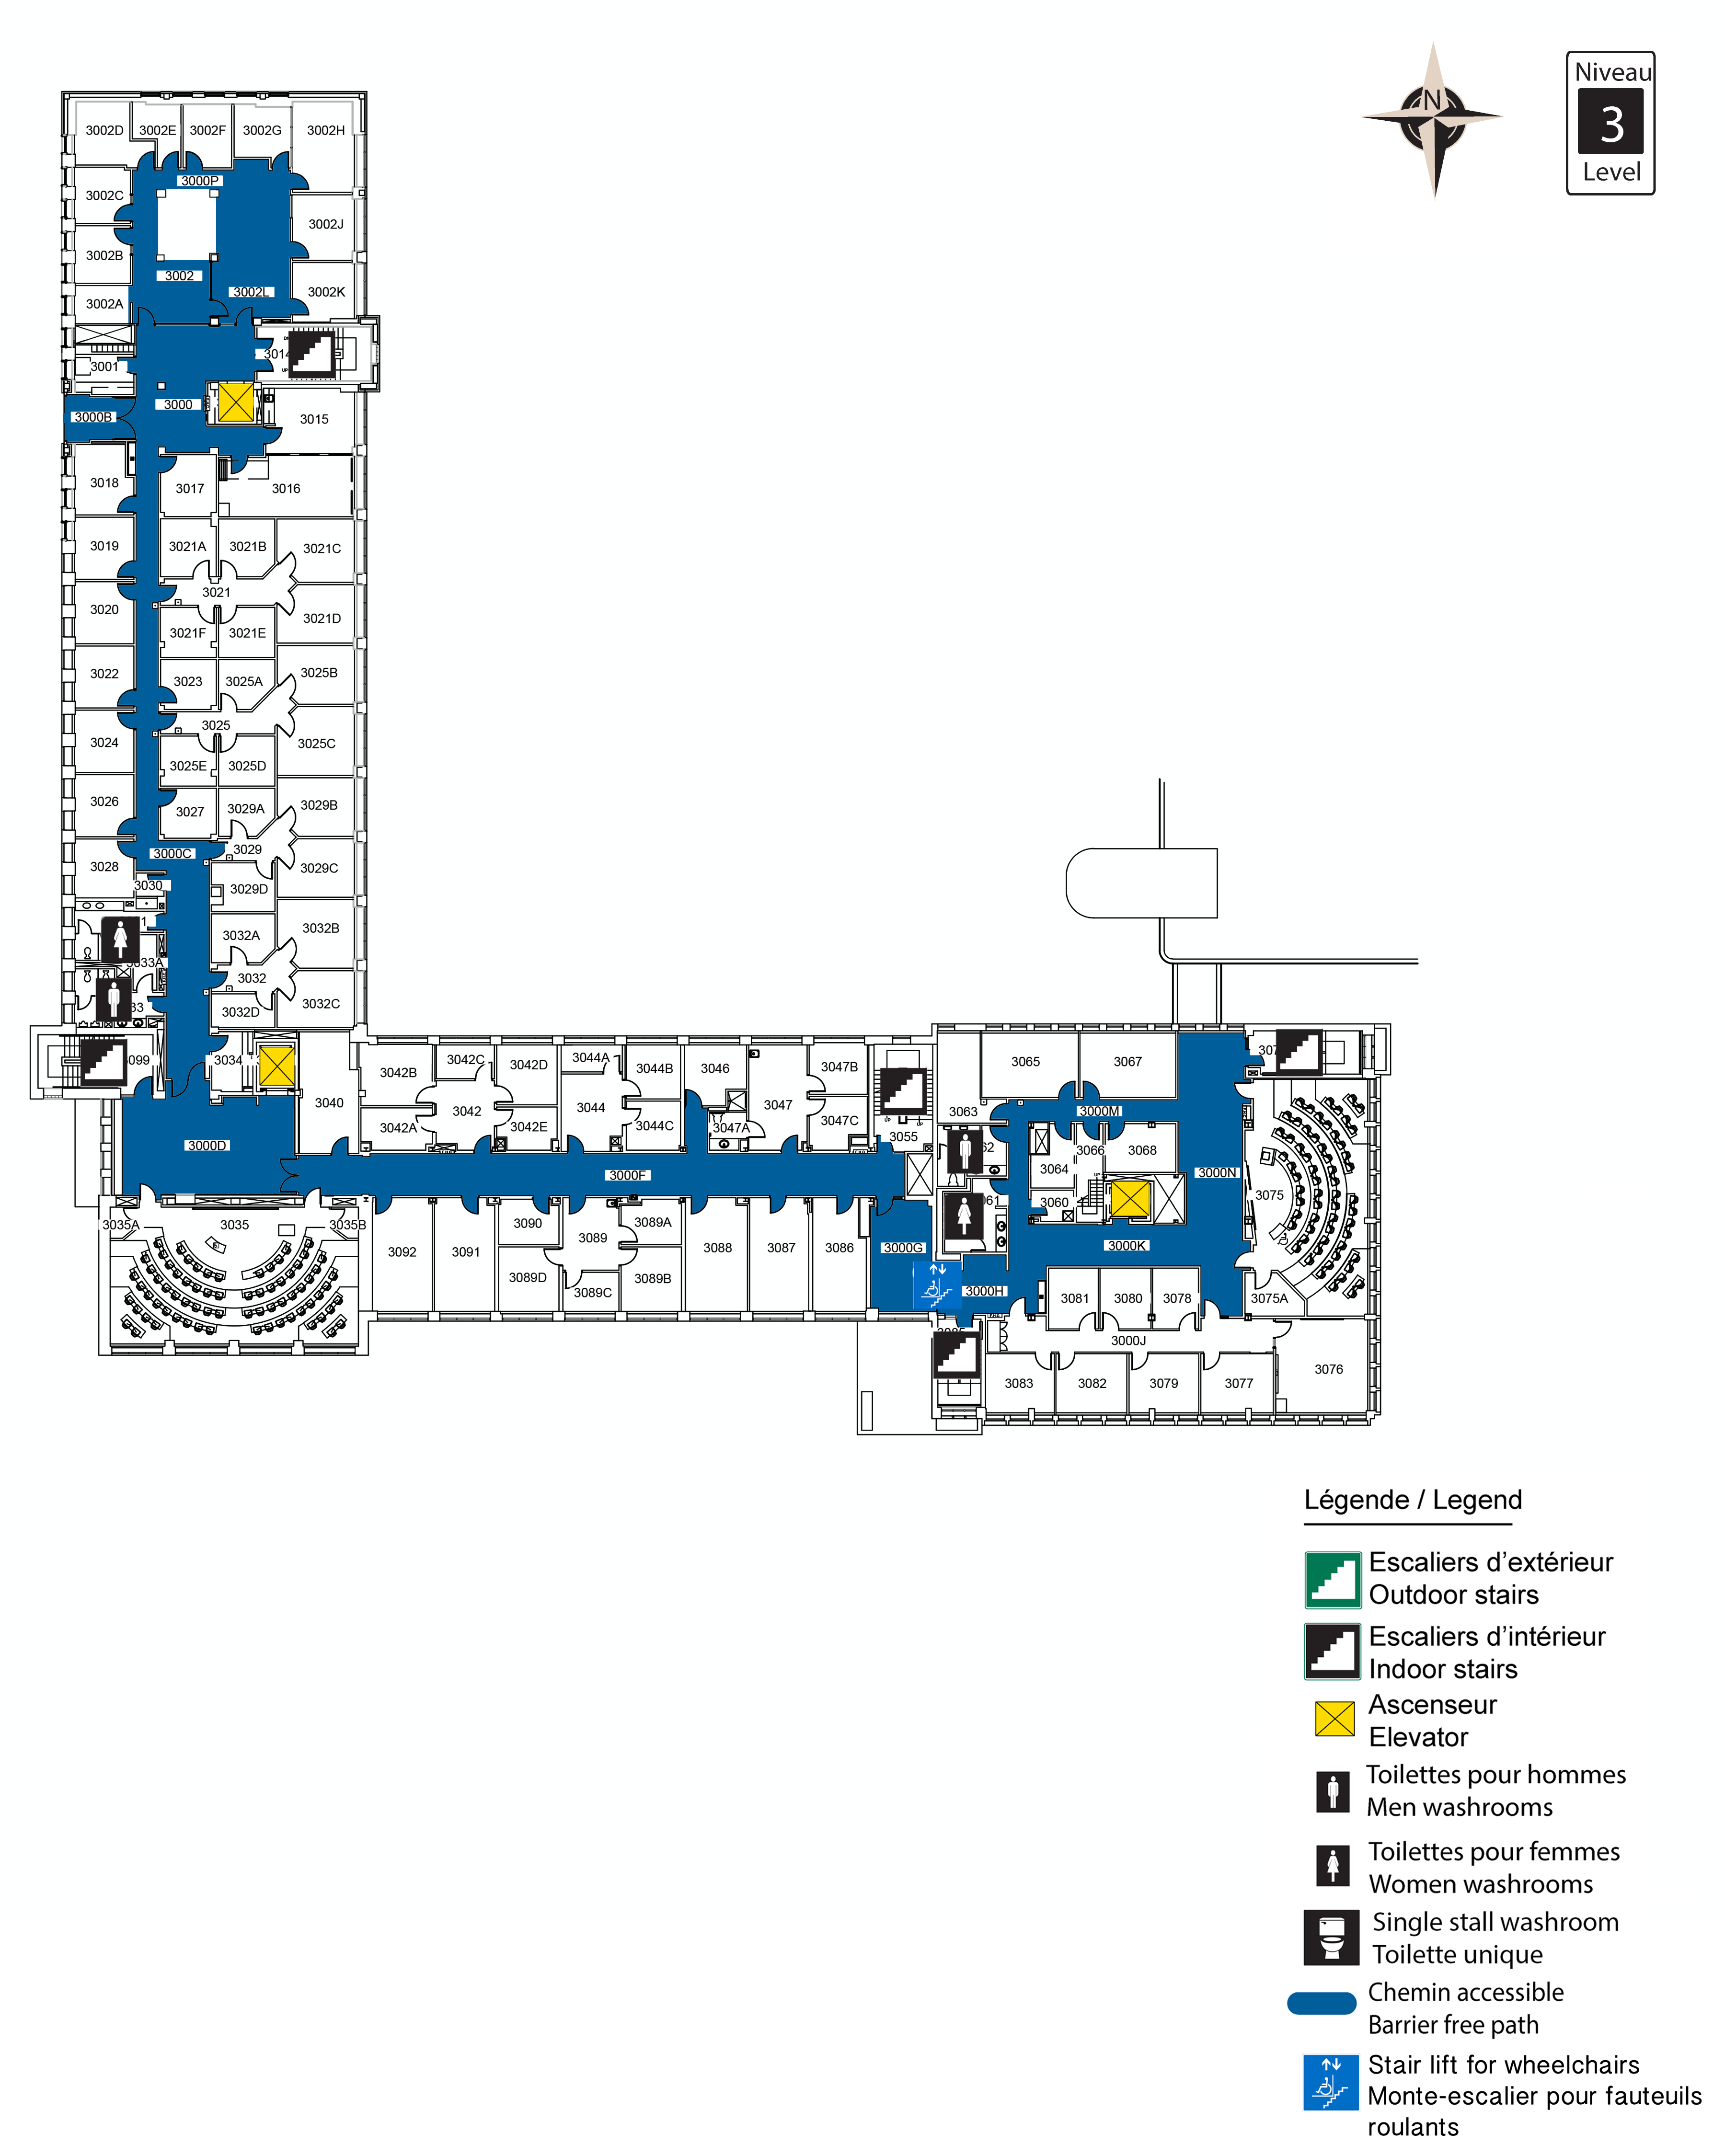 Accessible map of VNR level 3